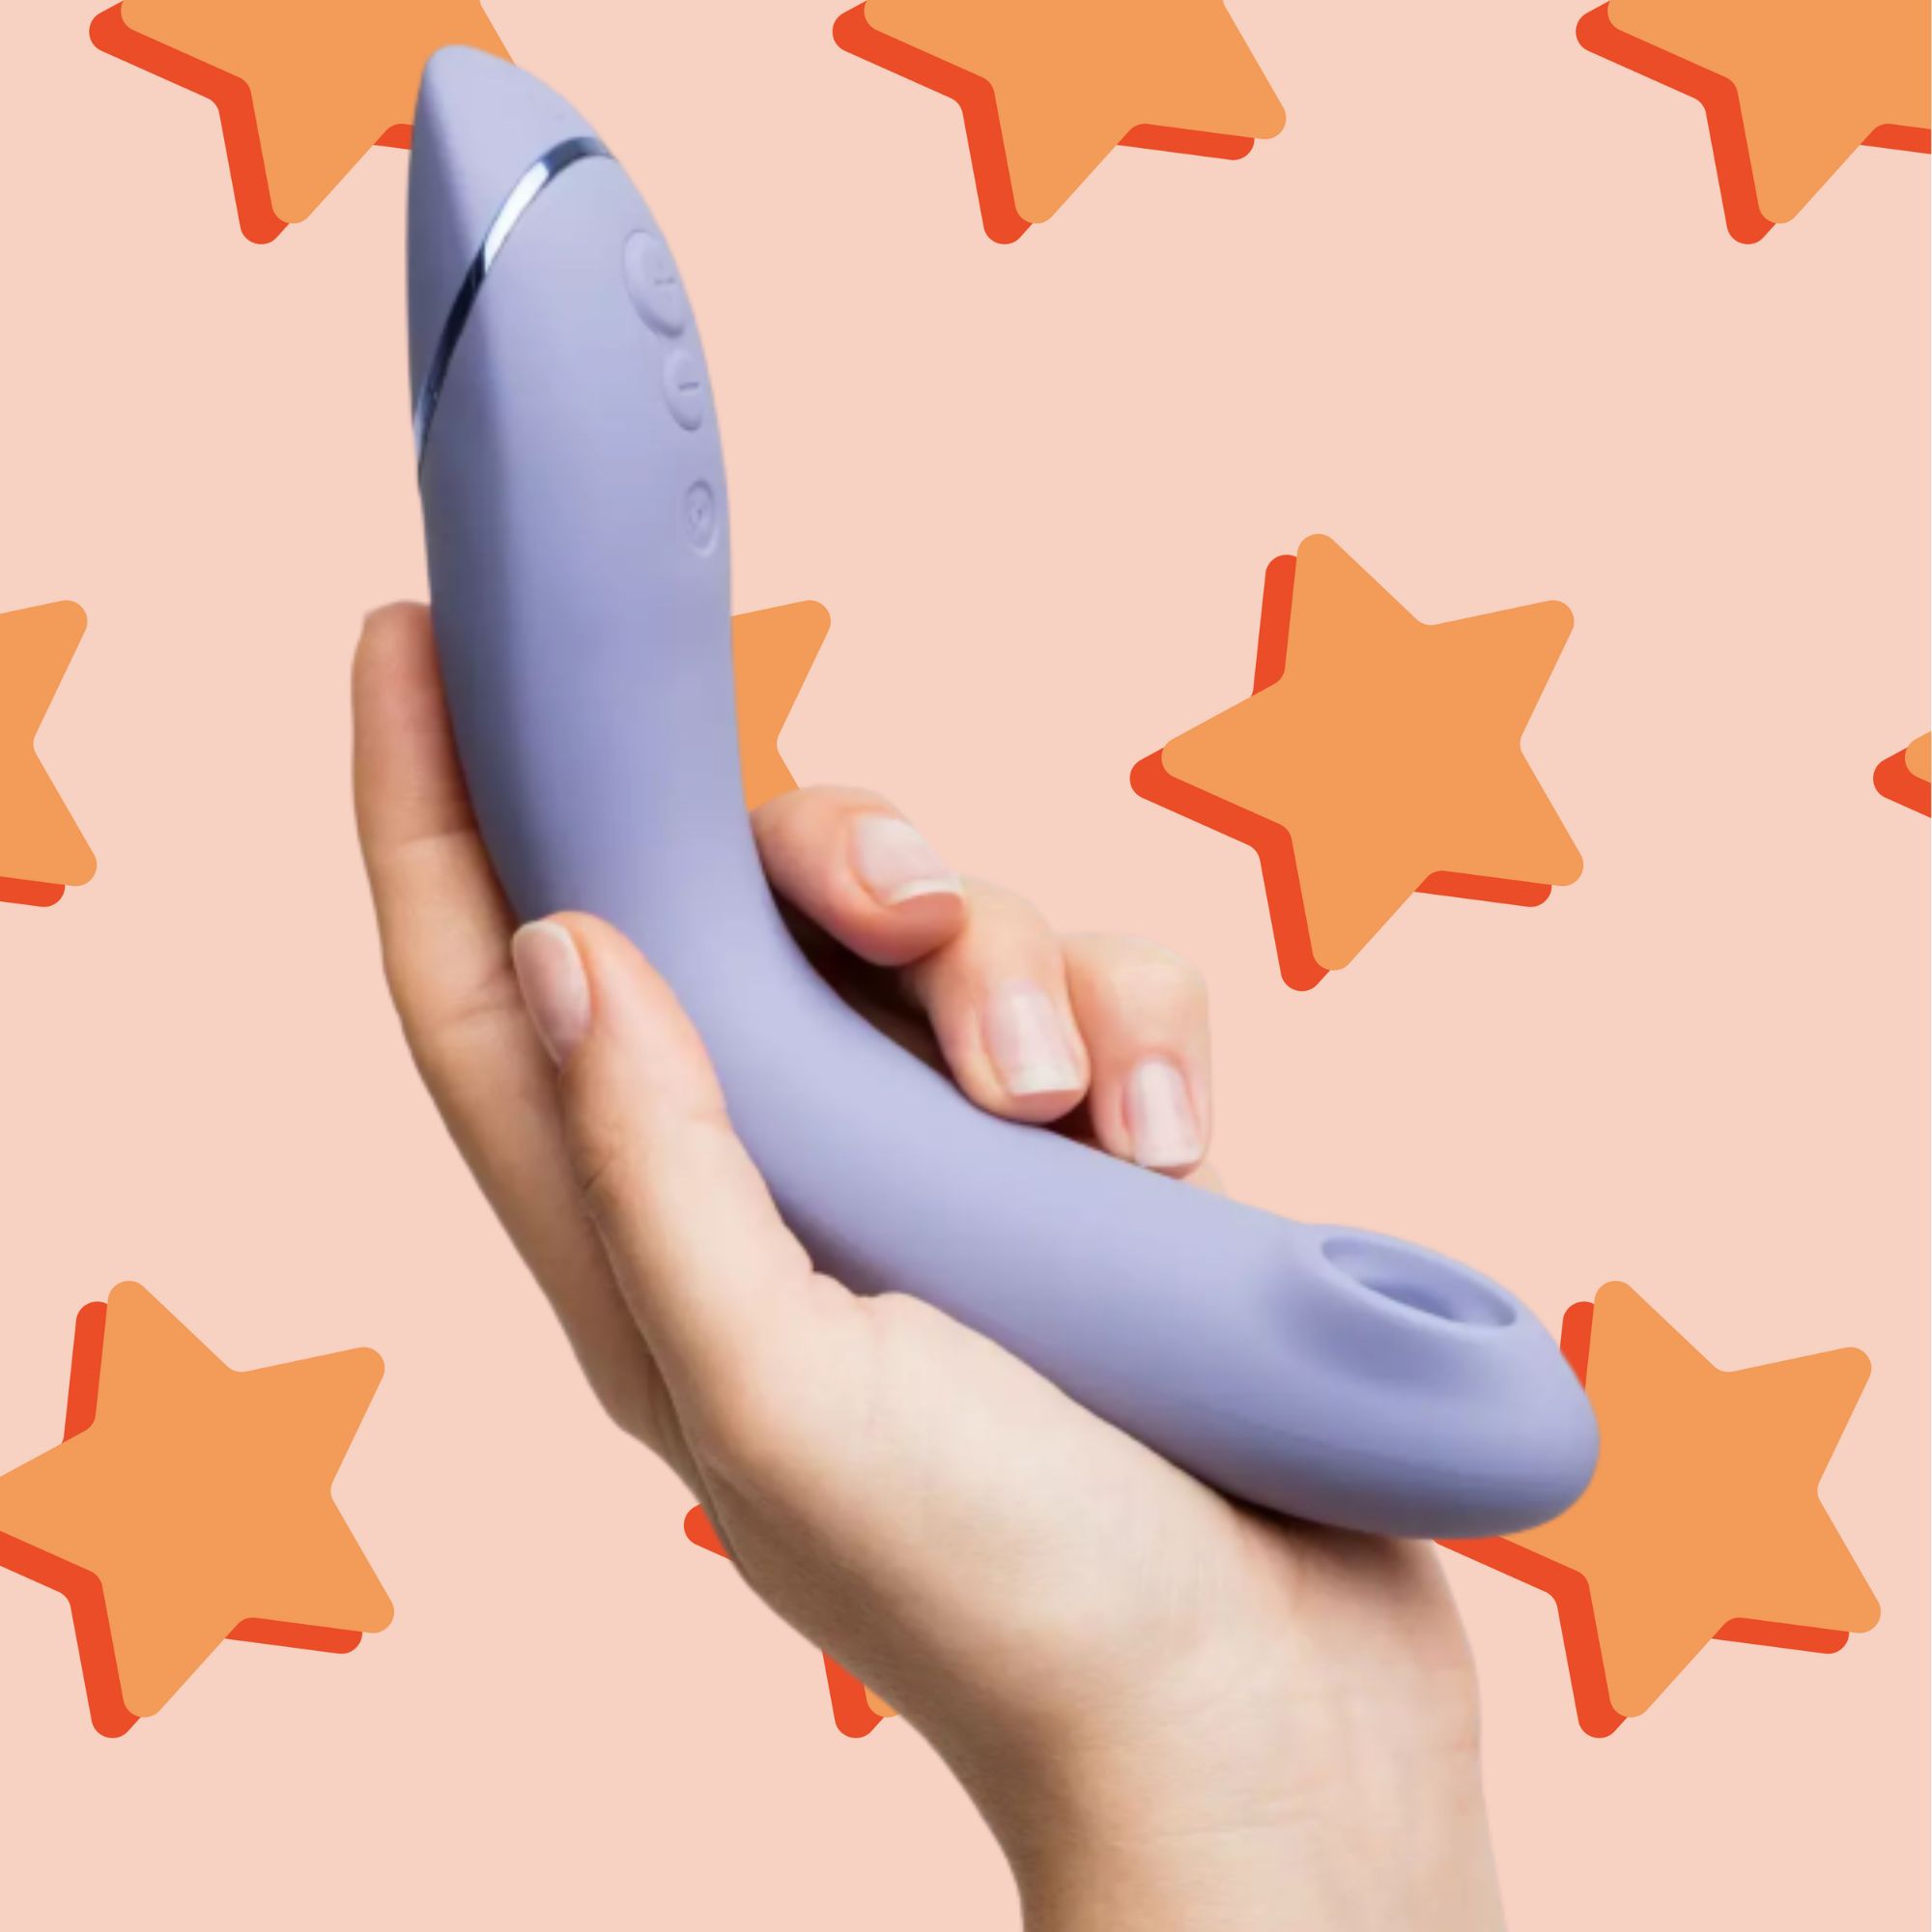 6 Expert-Approved Sex Toys That Can Teach You How to Have Better Orgasms picture